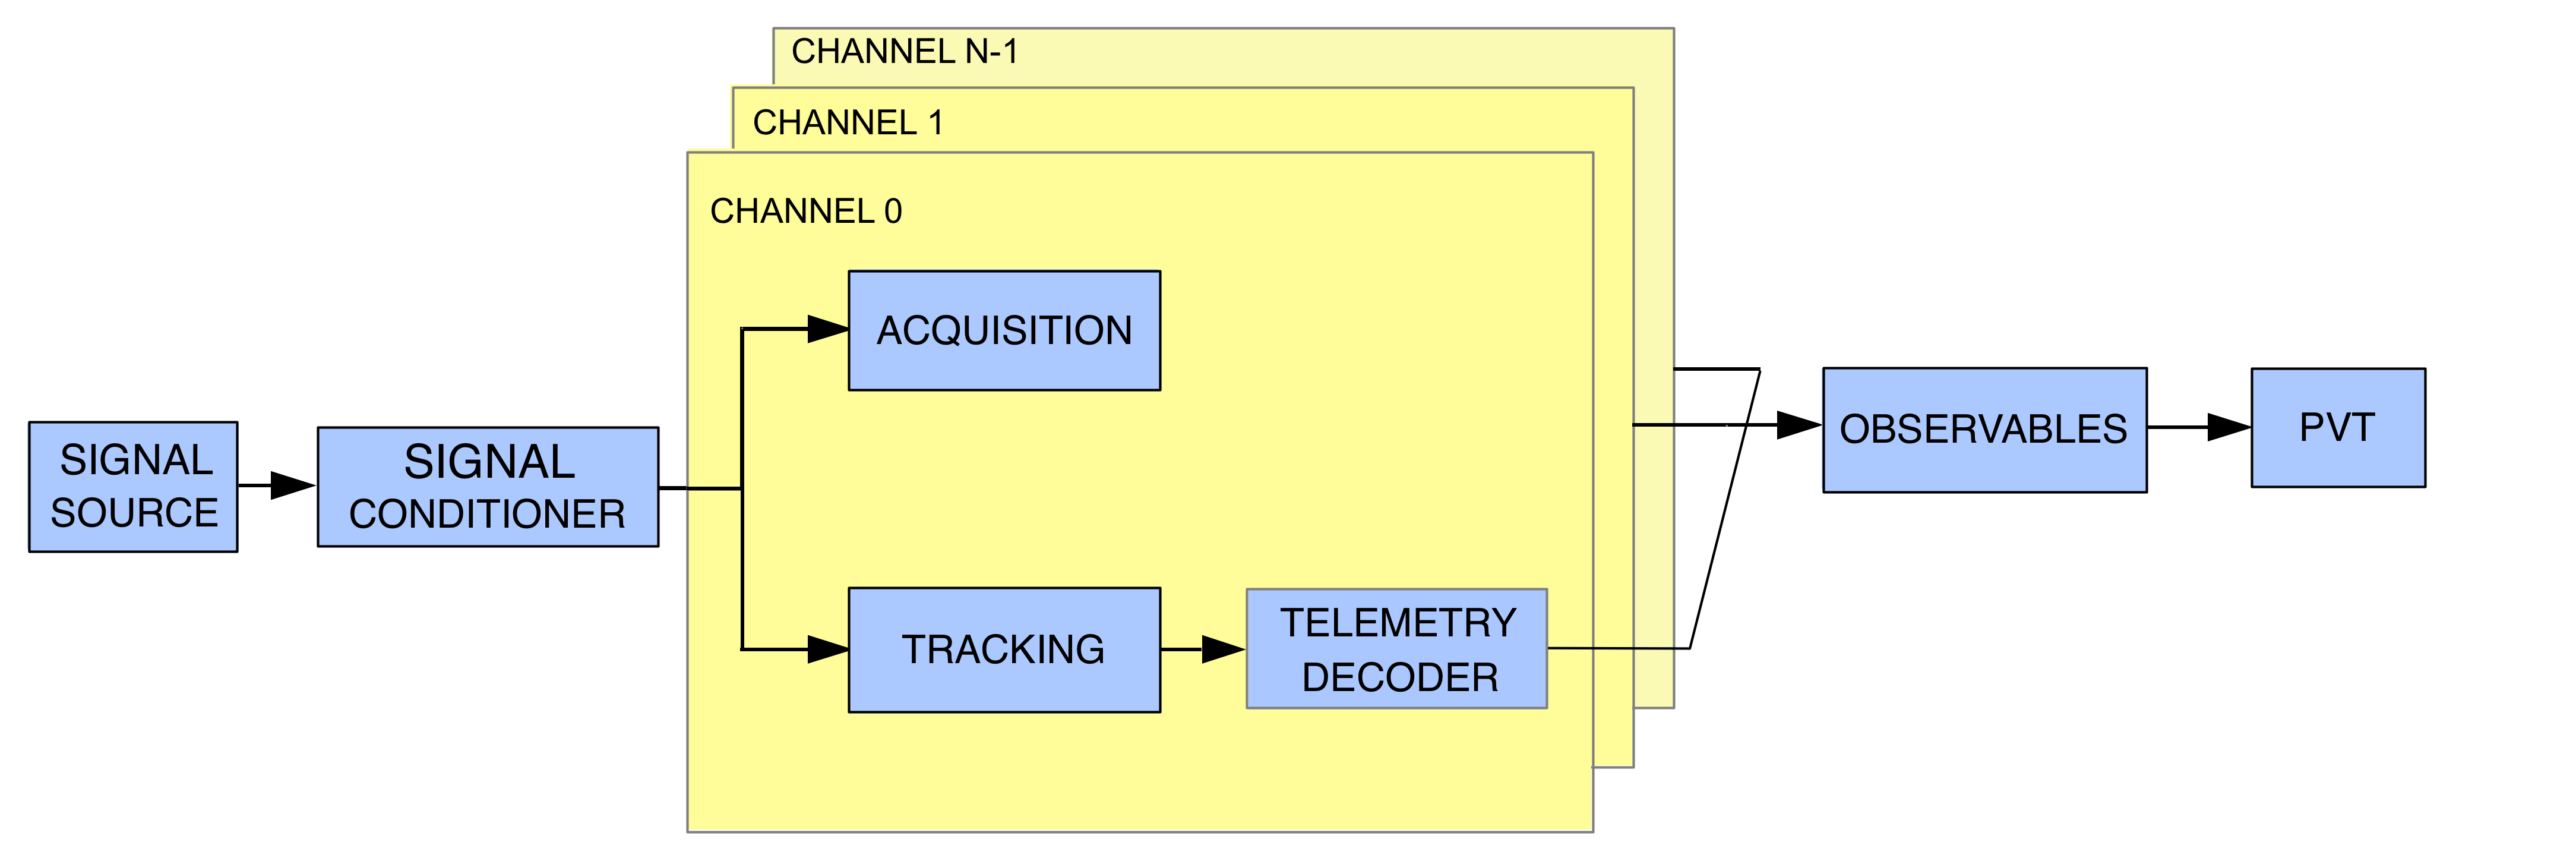 A typical GNSS-SDR flow graph